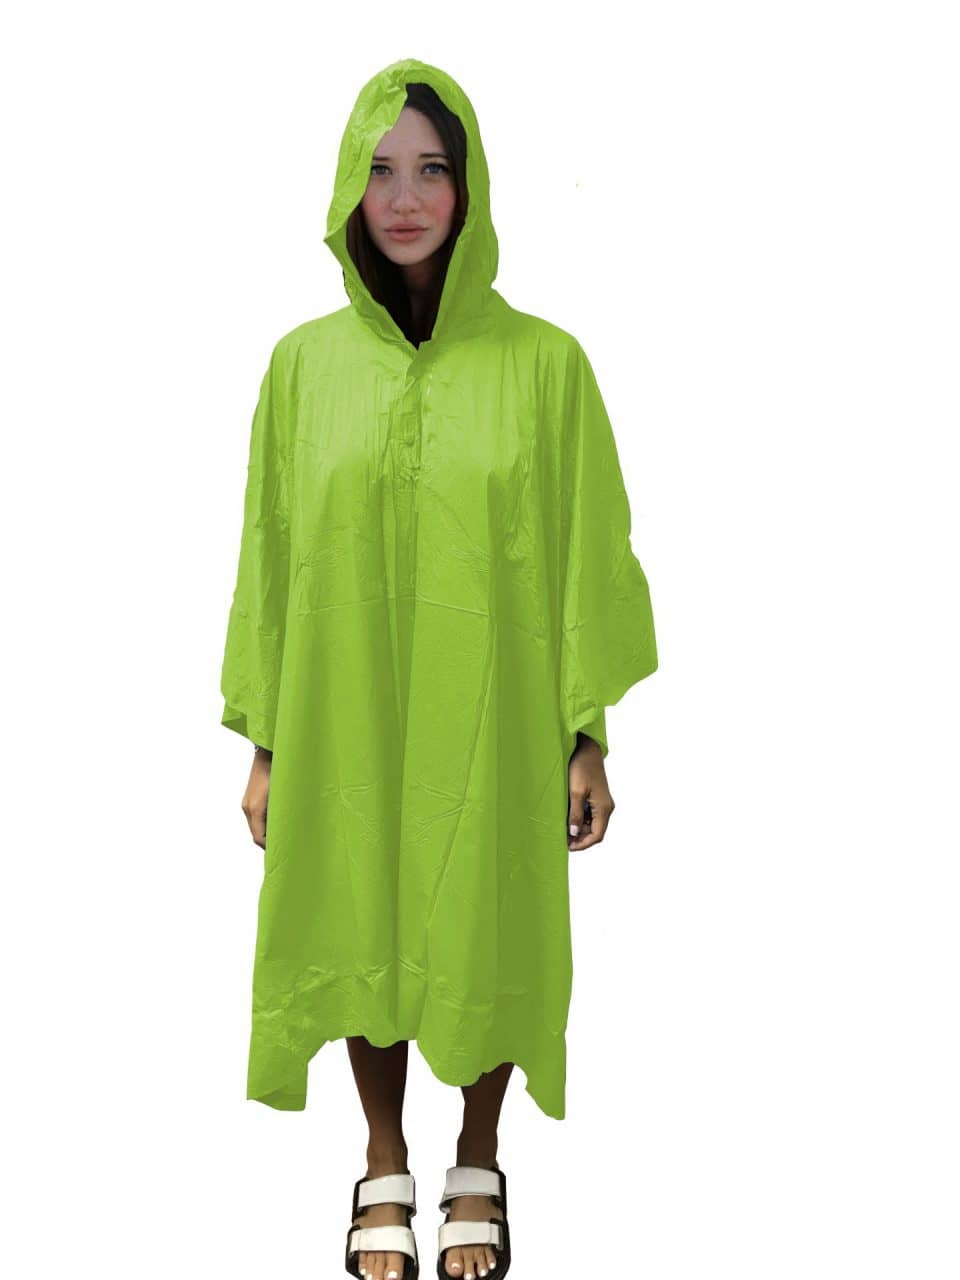 CAPA IMPERMEABLE PARA LLUVIA – Equipo militar, chalecos y morrales